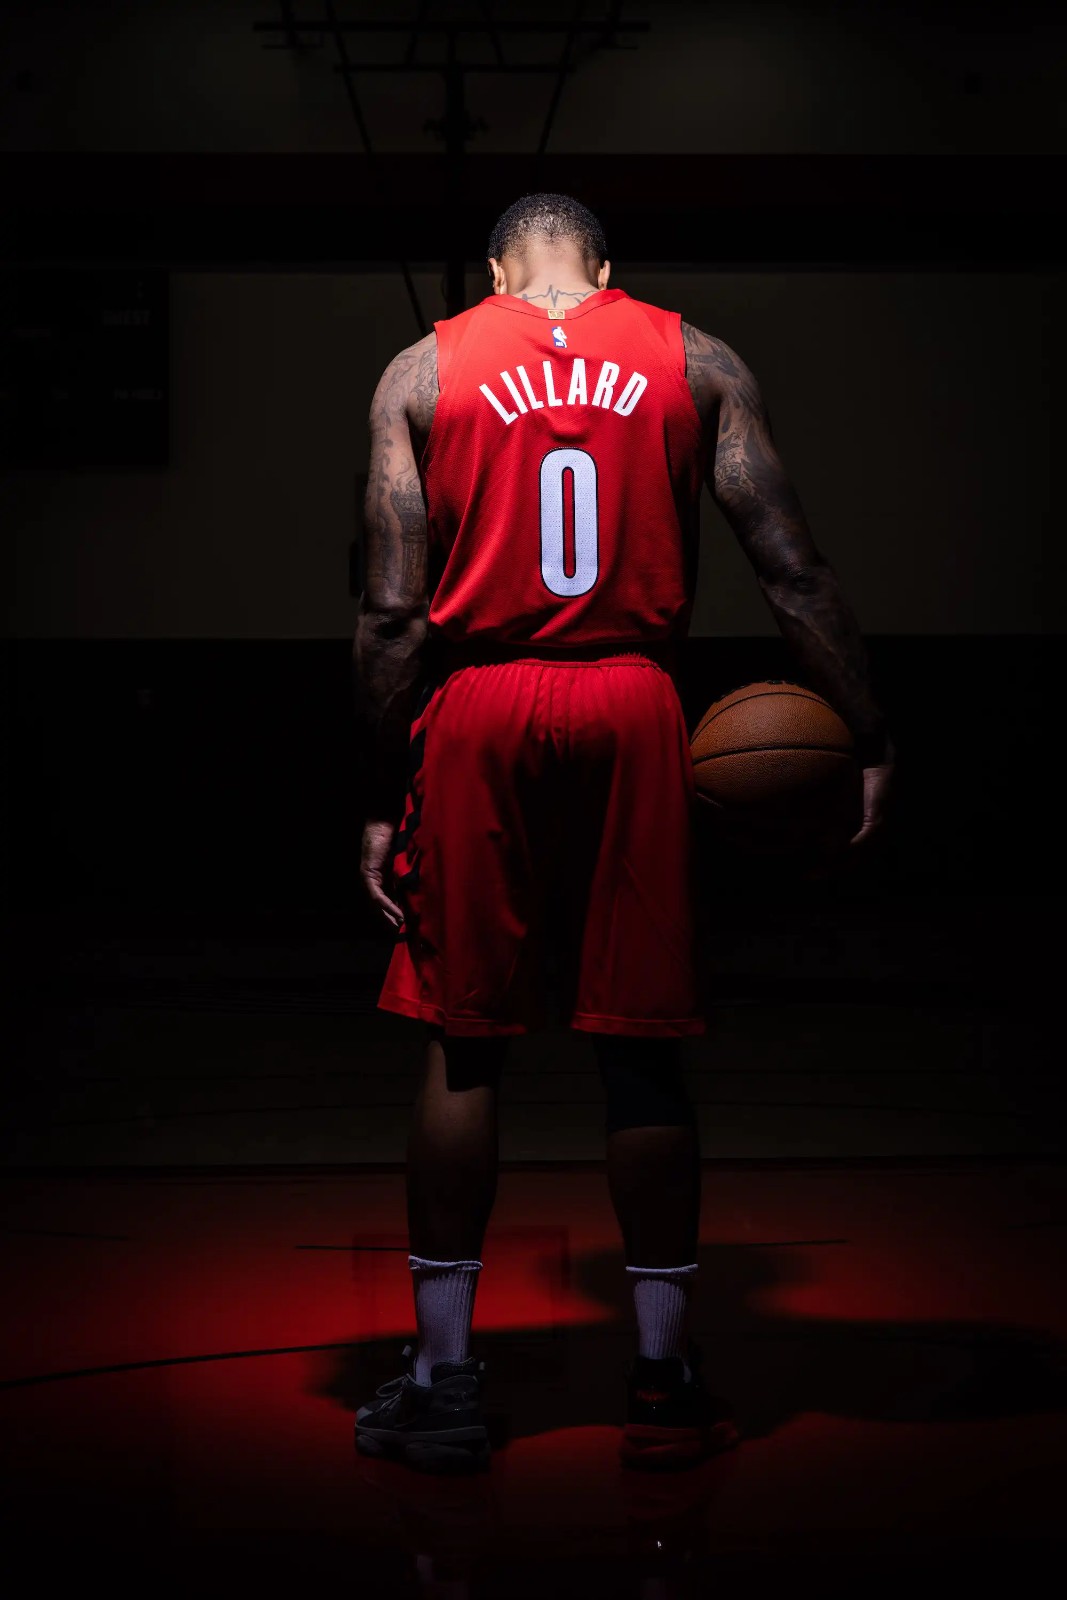 Portland Trail Blazers red 'Statement' jersey gets an update for 2019-20:  Do you love it or hate it? 